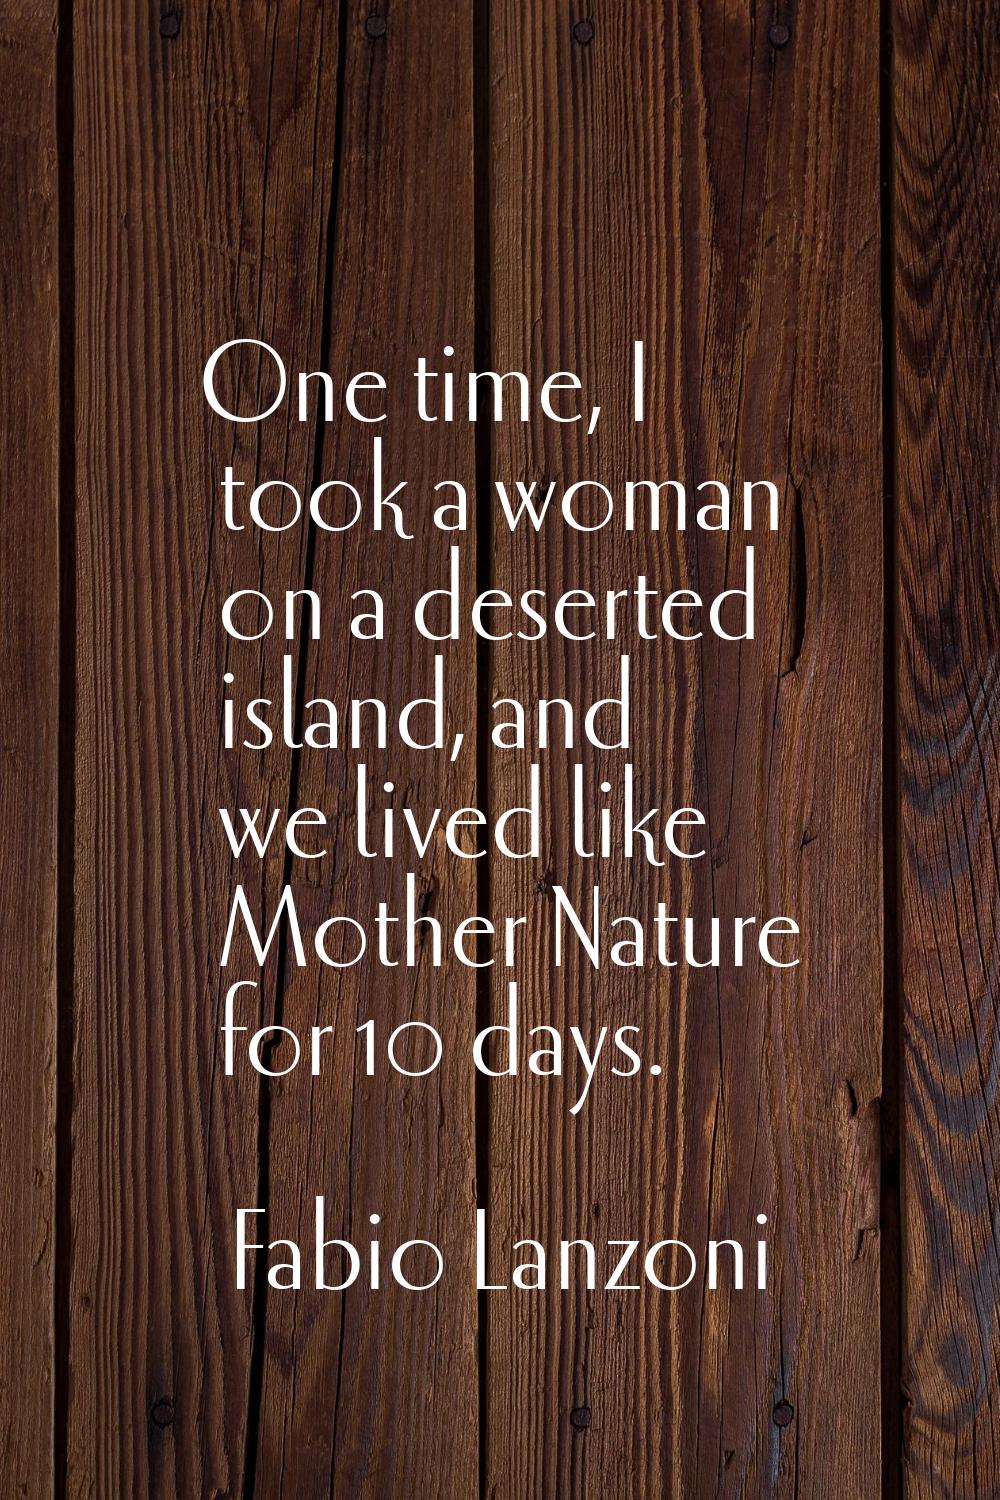 One time, I took a woman on a deserted island, and we lived like Mother Nature for 10 days.